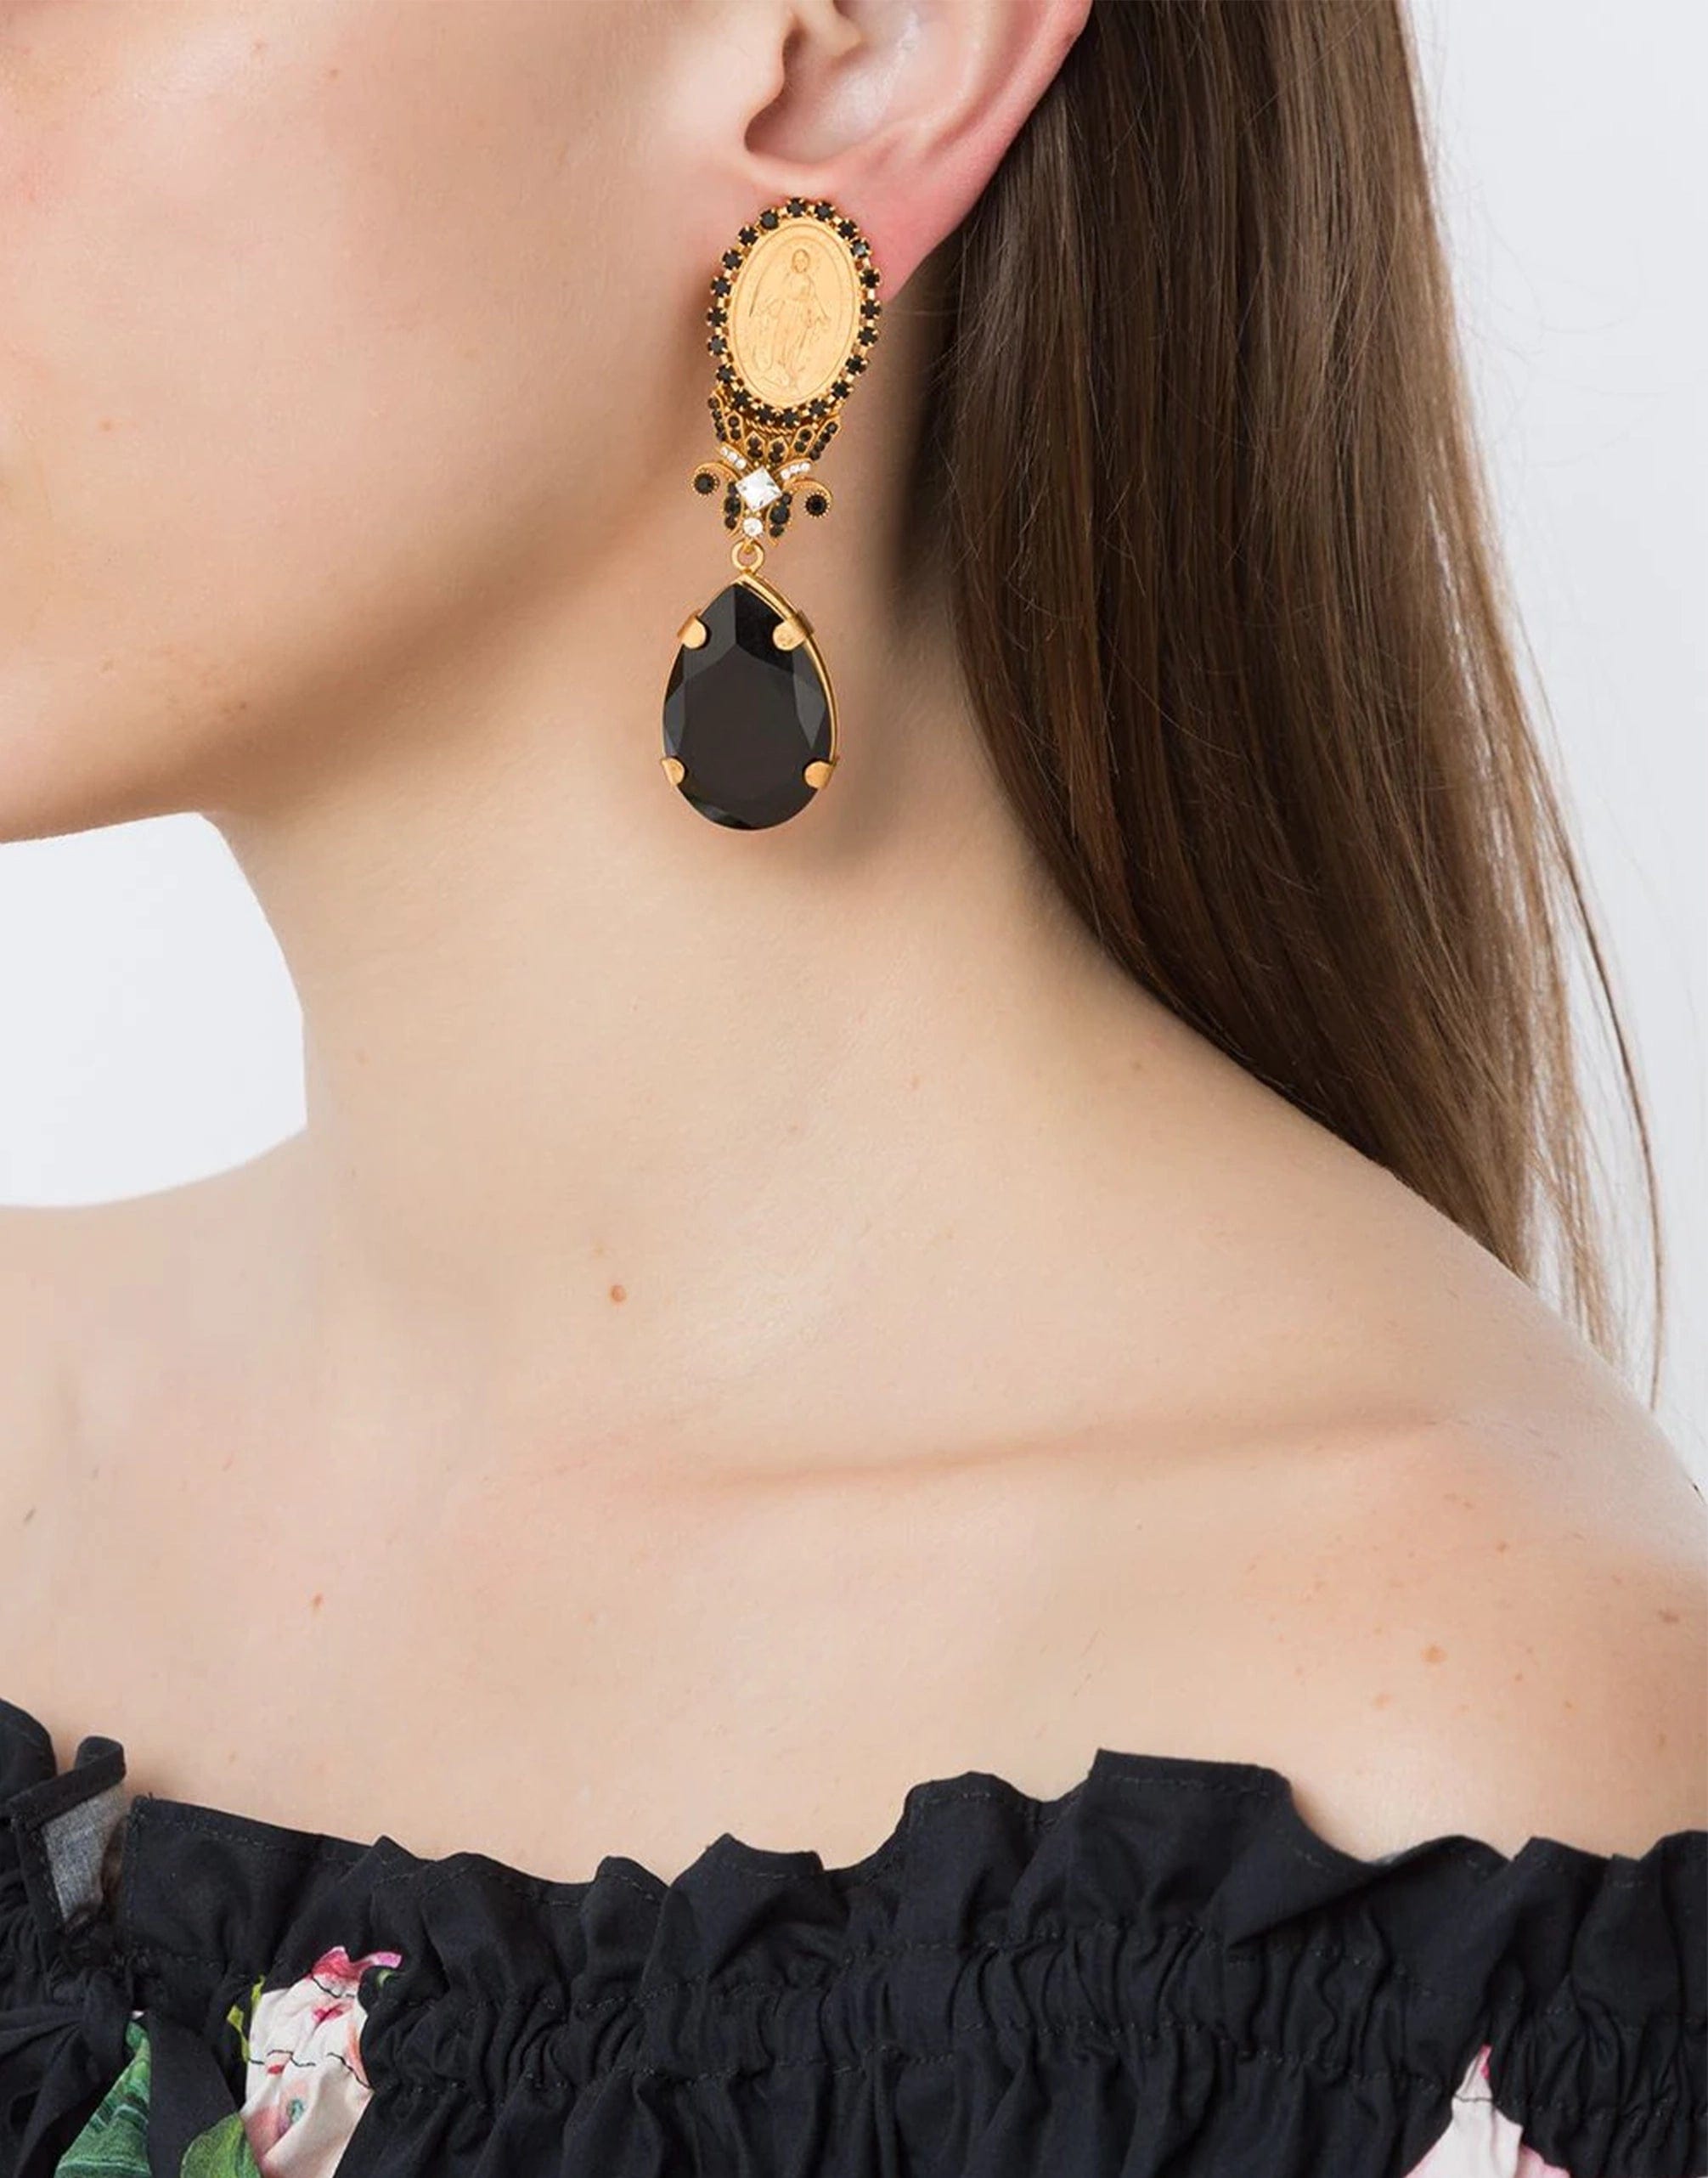 Dolce & Gabbana Pendant Earrings With Votive Decorations